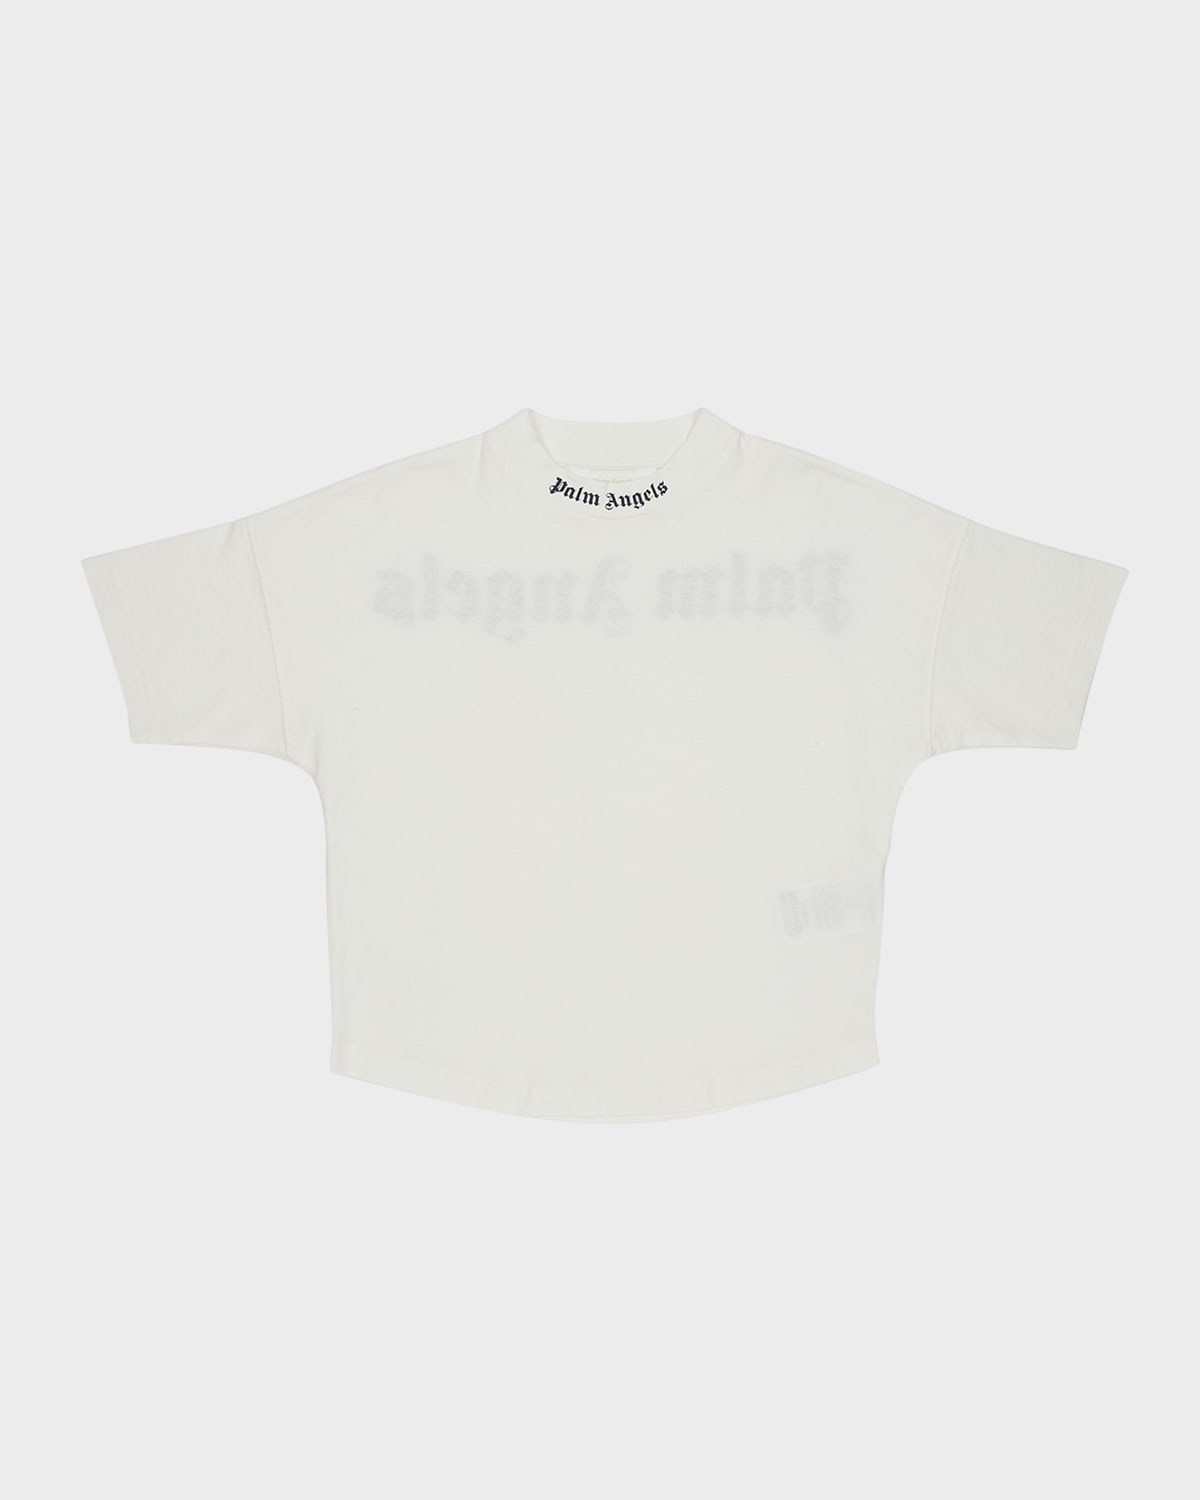 Palm Angels Kids' Classic Logo T-shirt In White Navy